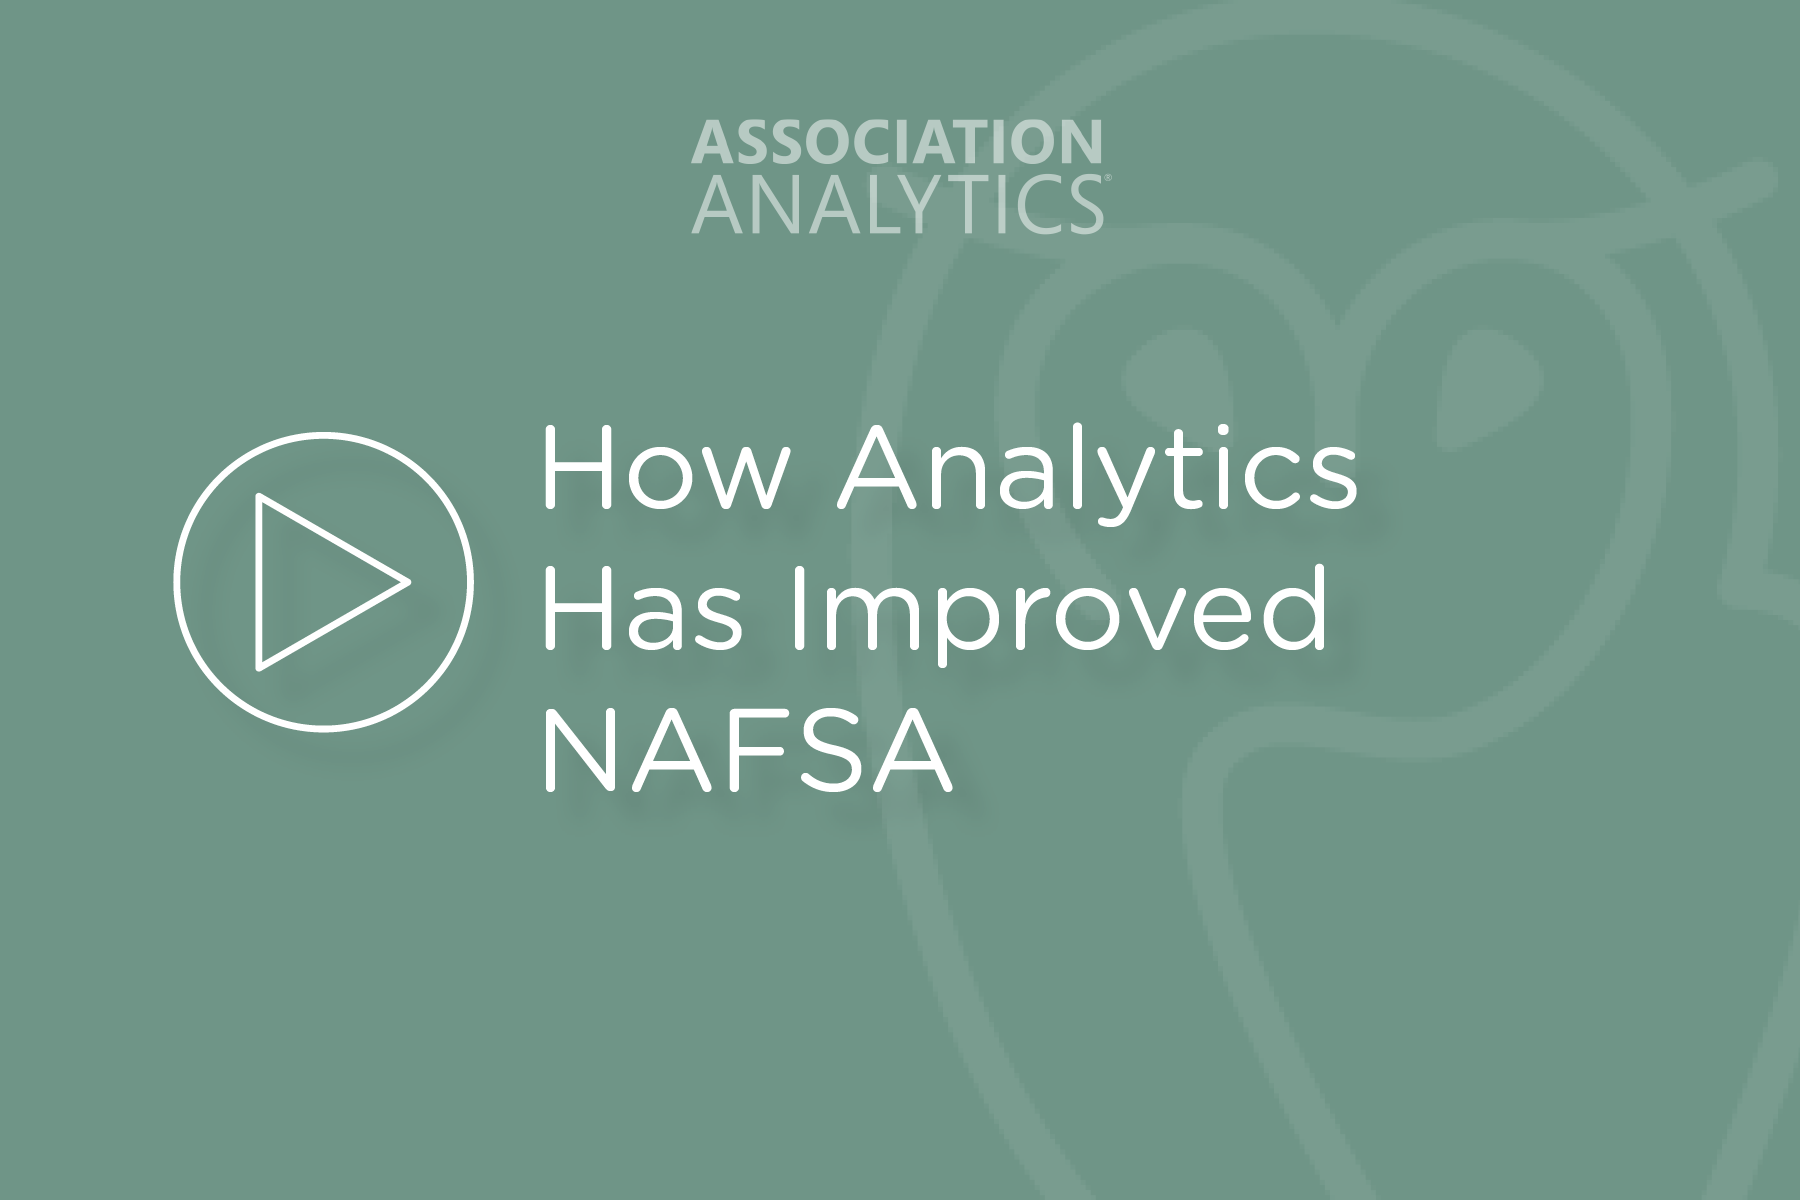 How Analytics has improved NAFSA